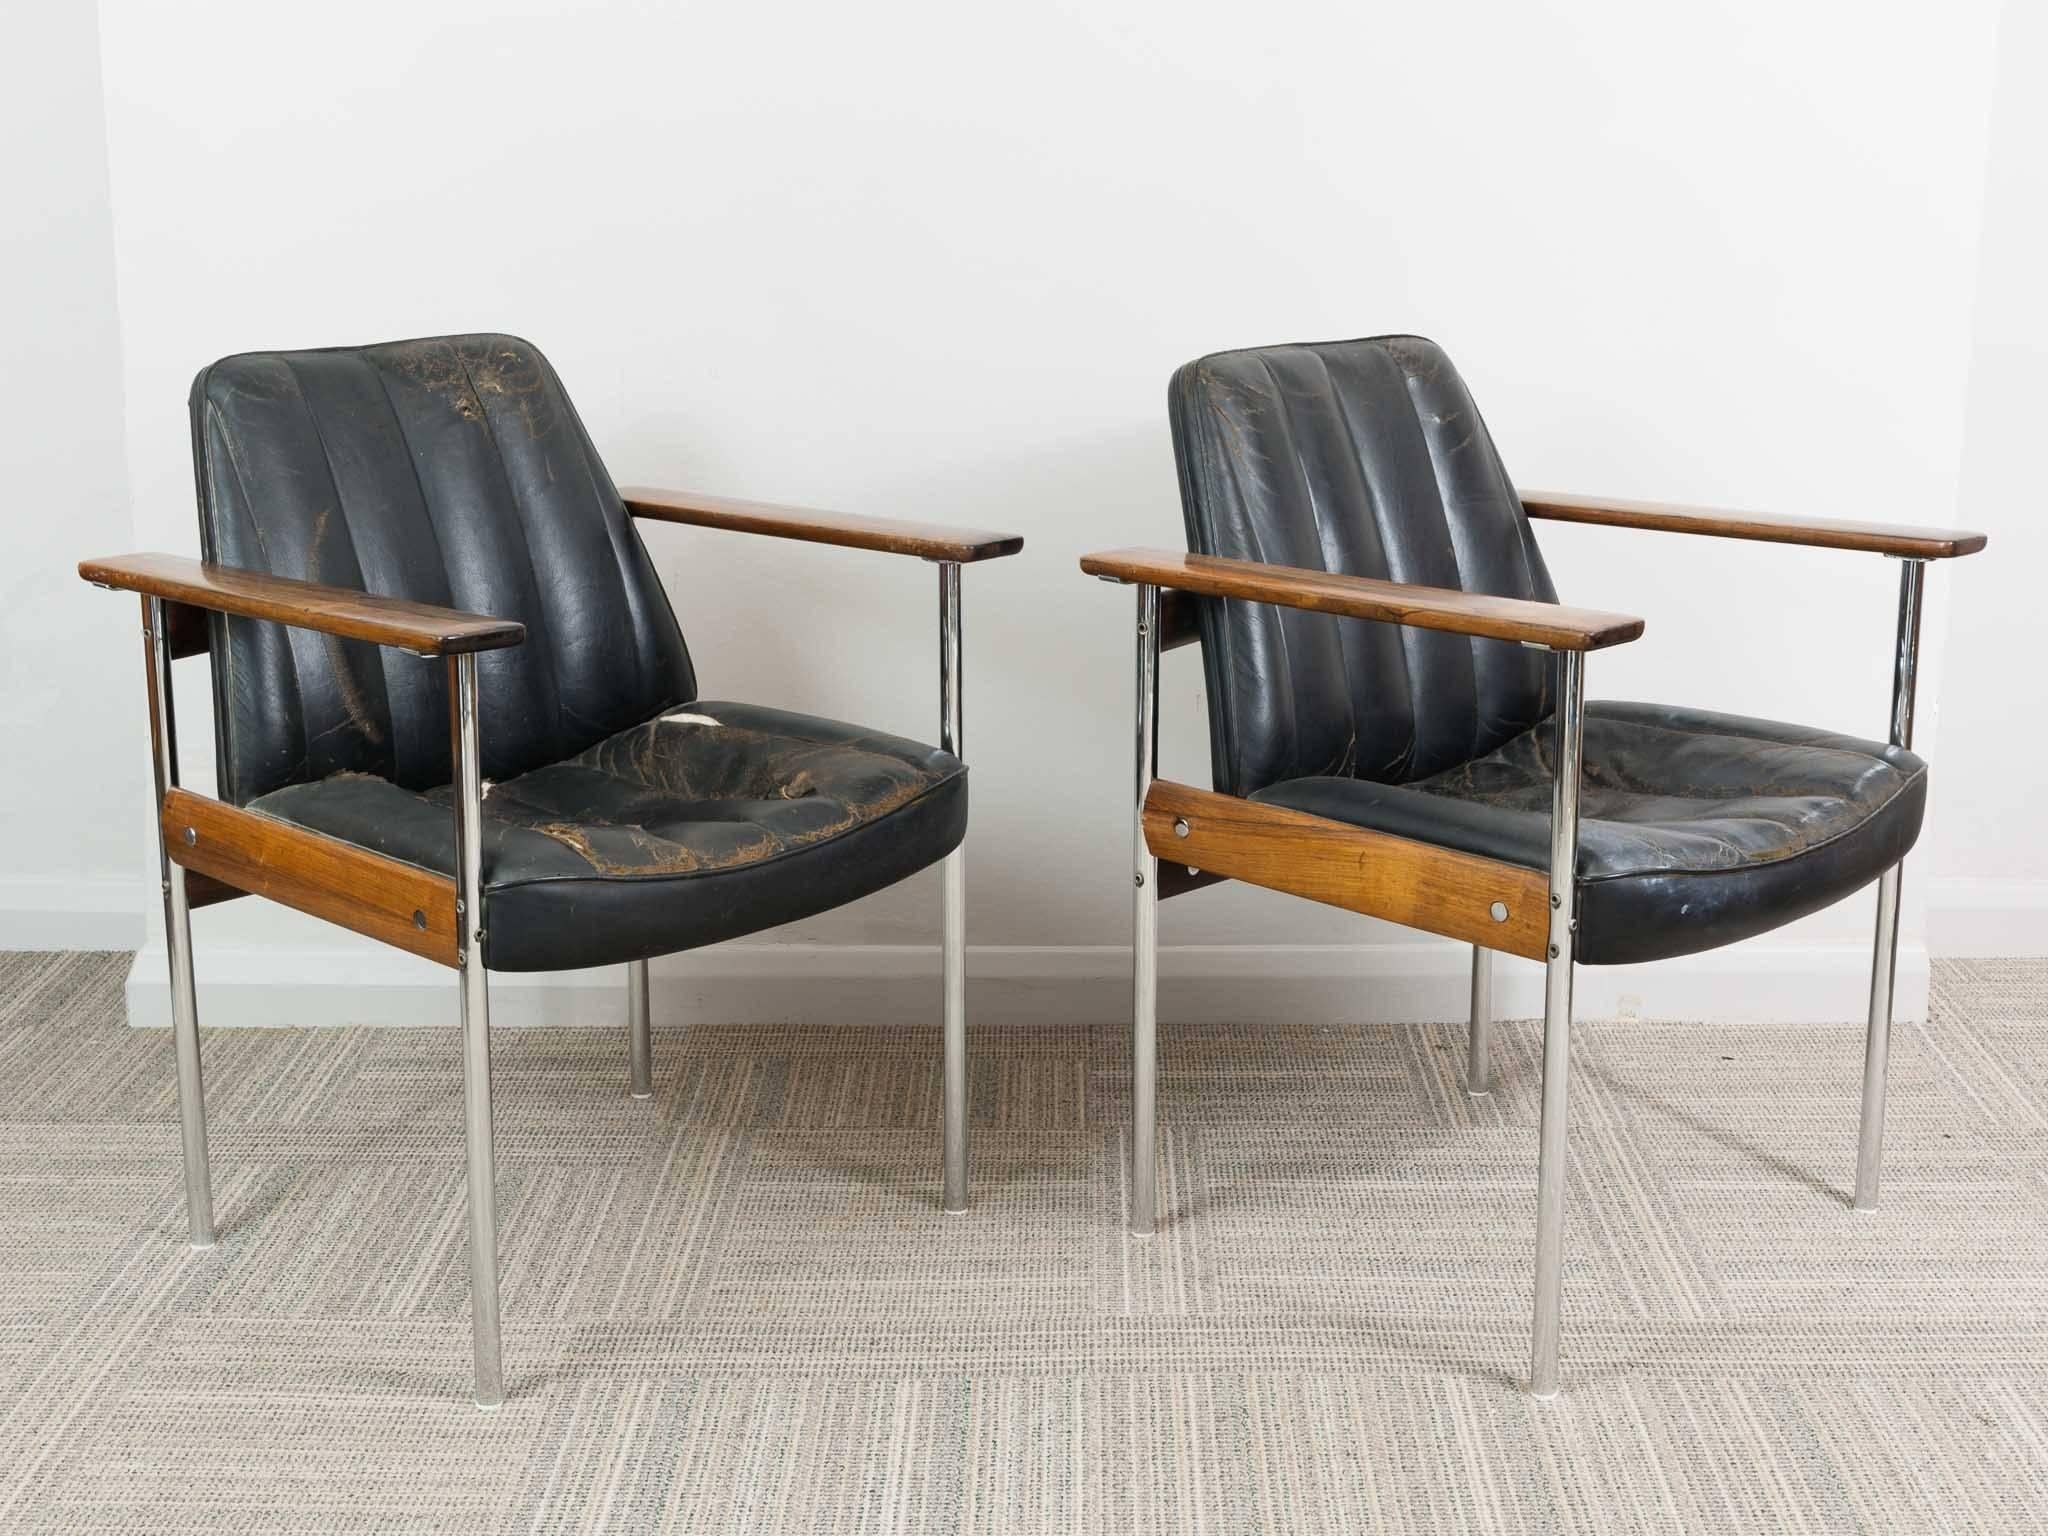 Pair of 1960s Rosewood Leather Chrome Armchairs by Sven Ivar Dysthe for Dokka 2